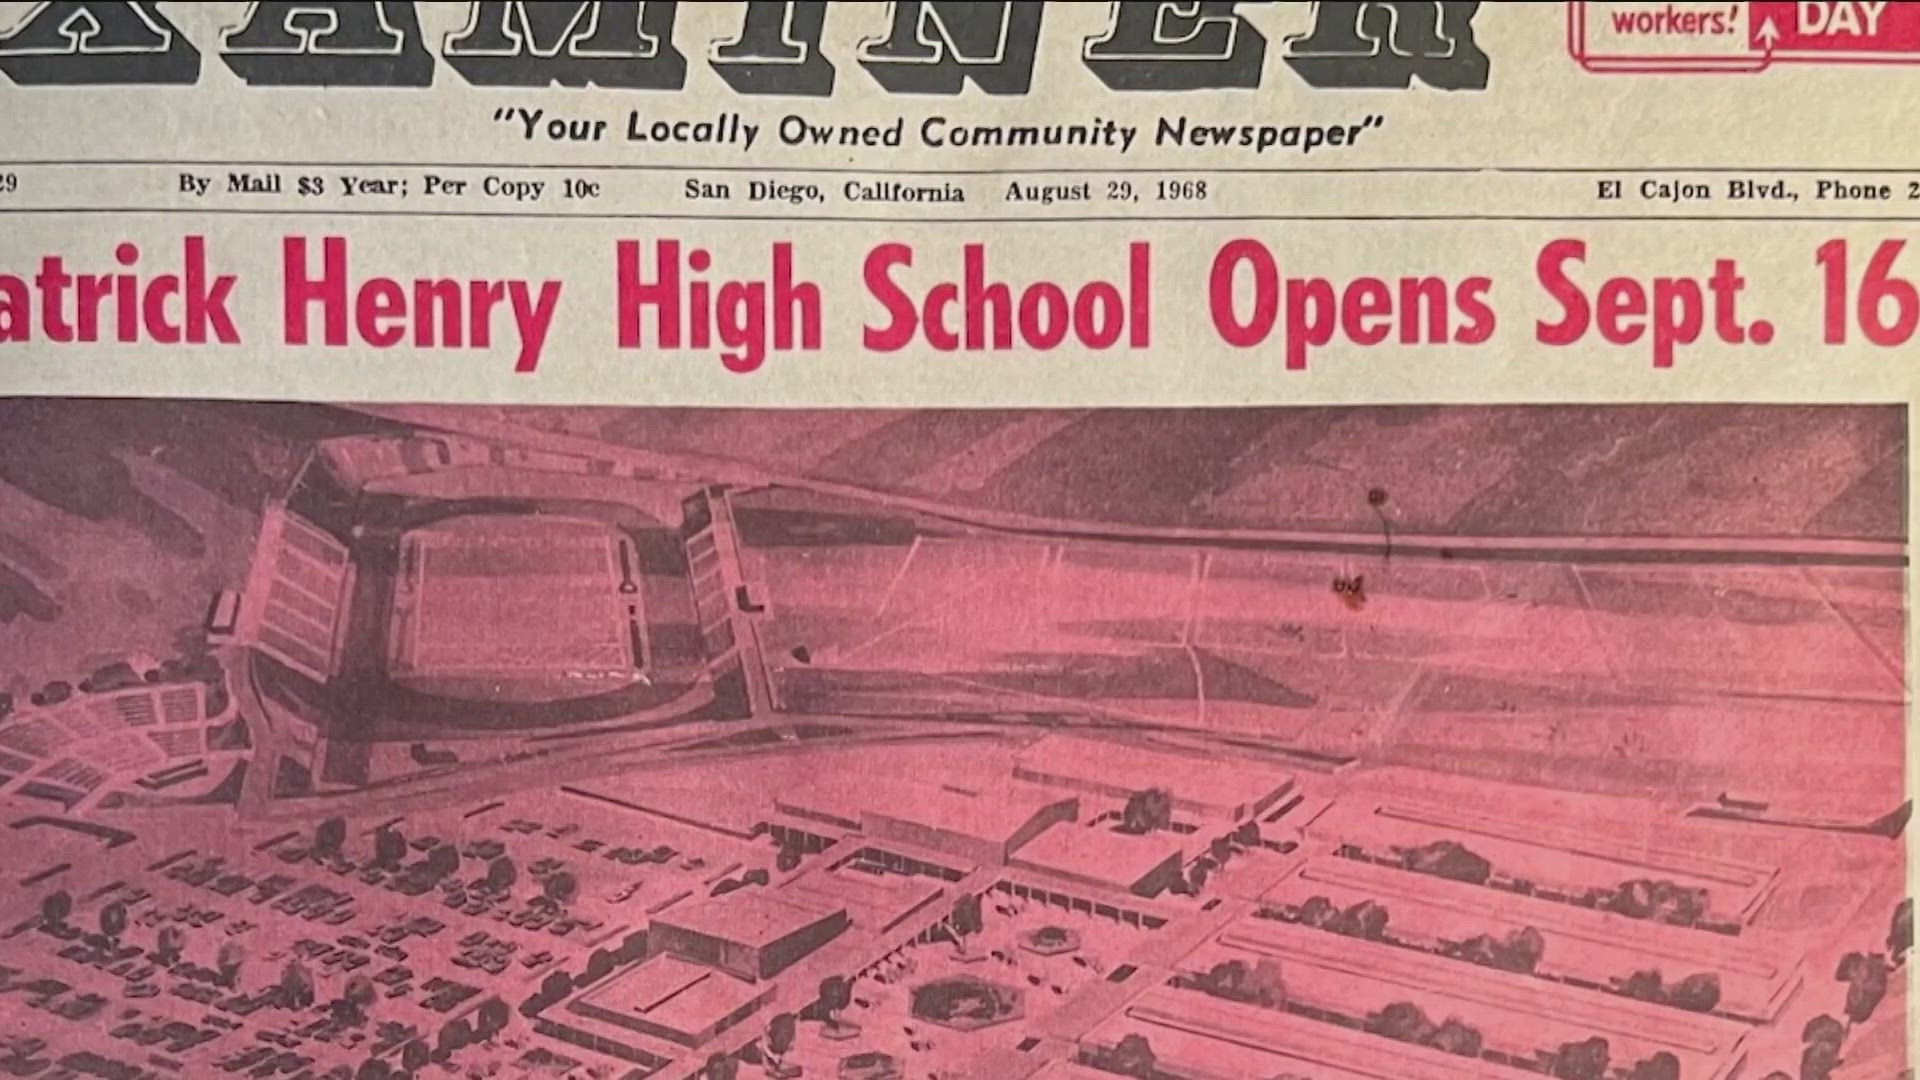 One of the first students to attend Patrick Henry happens to be an Emmy award winner. He became interested in sharing the school's story after a high school reunion.